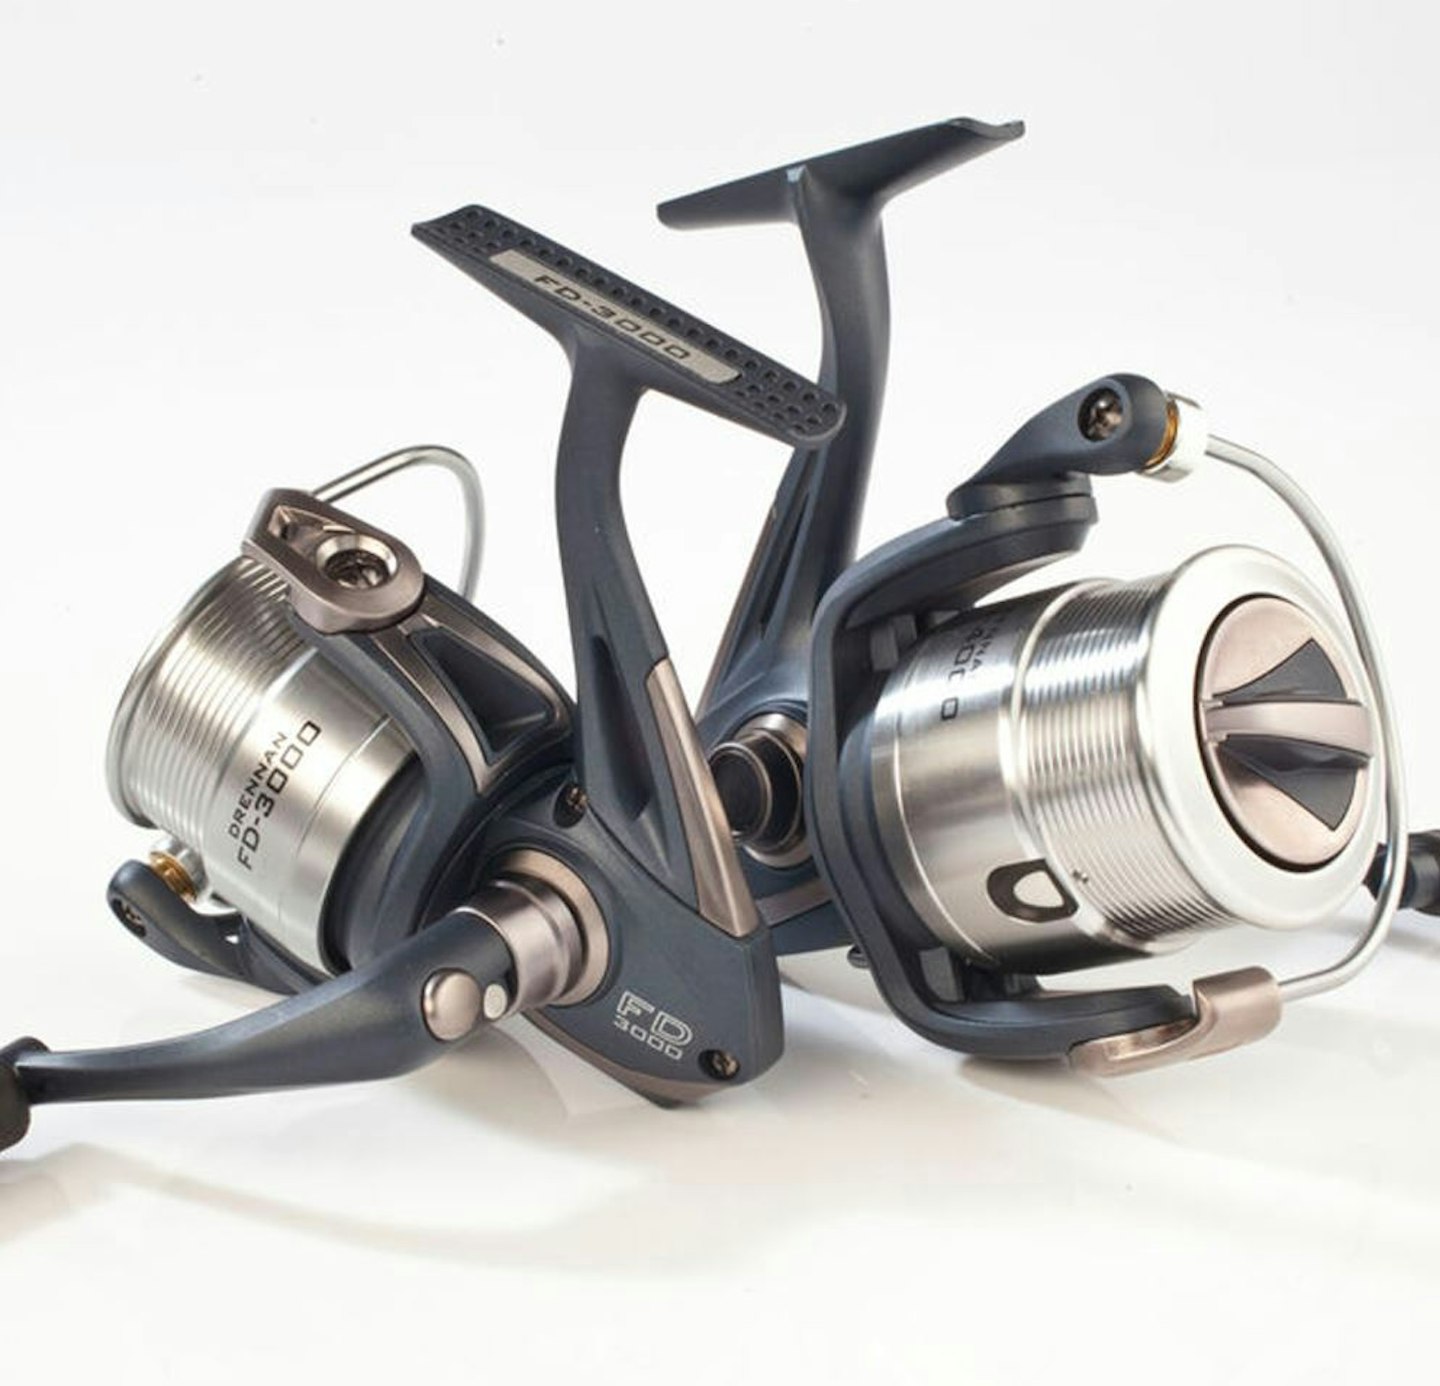 The best reels for under £75